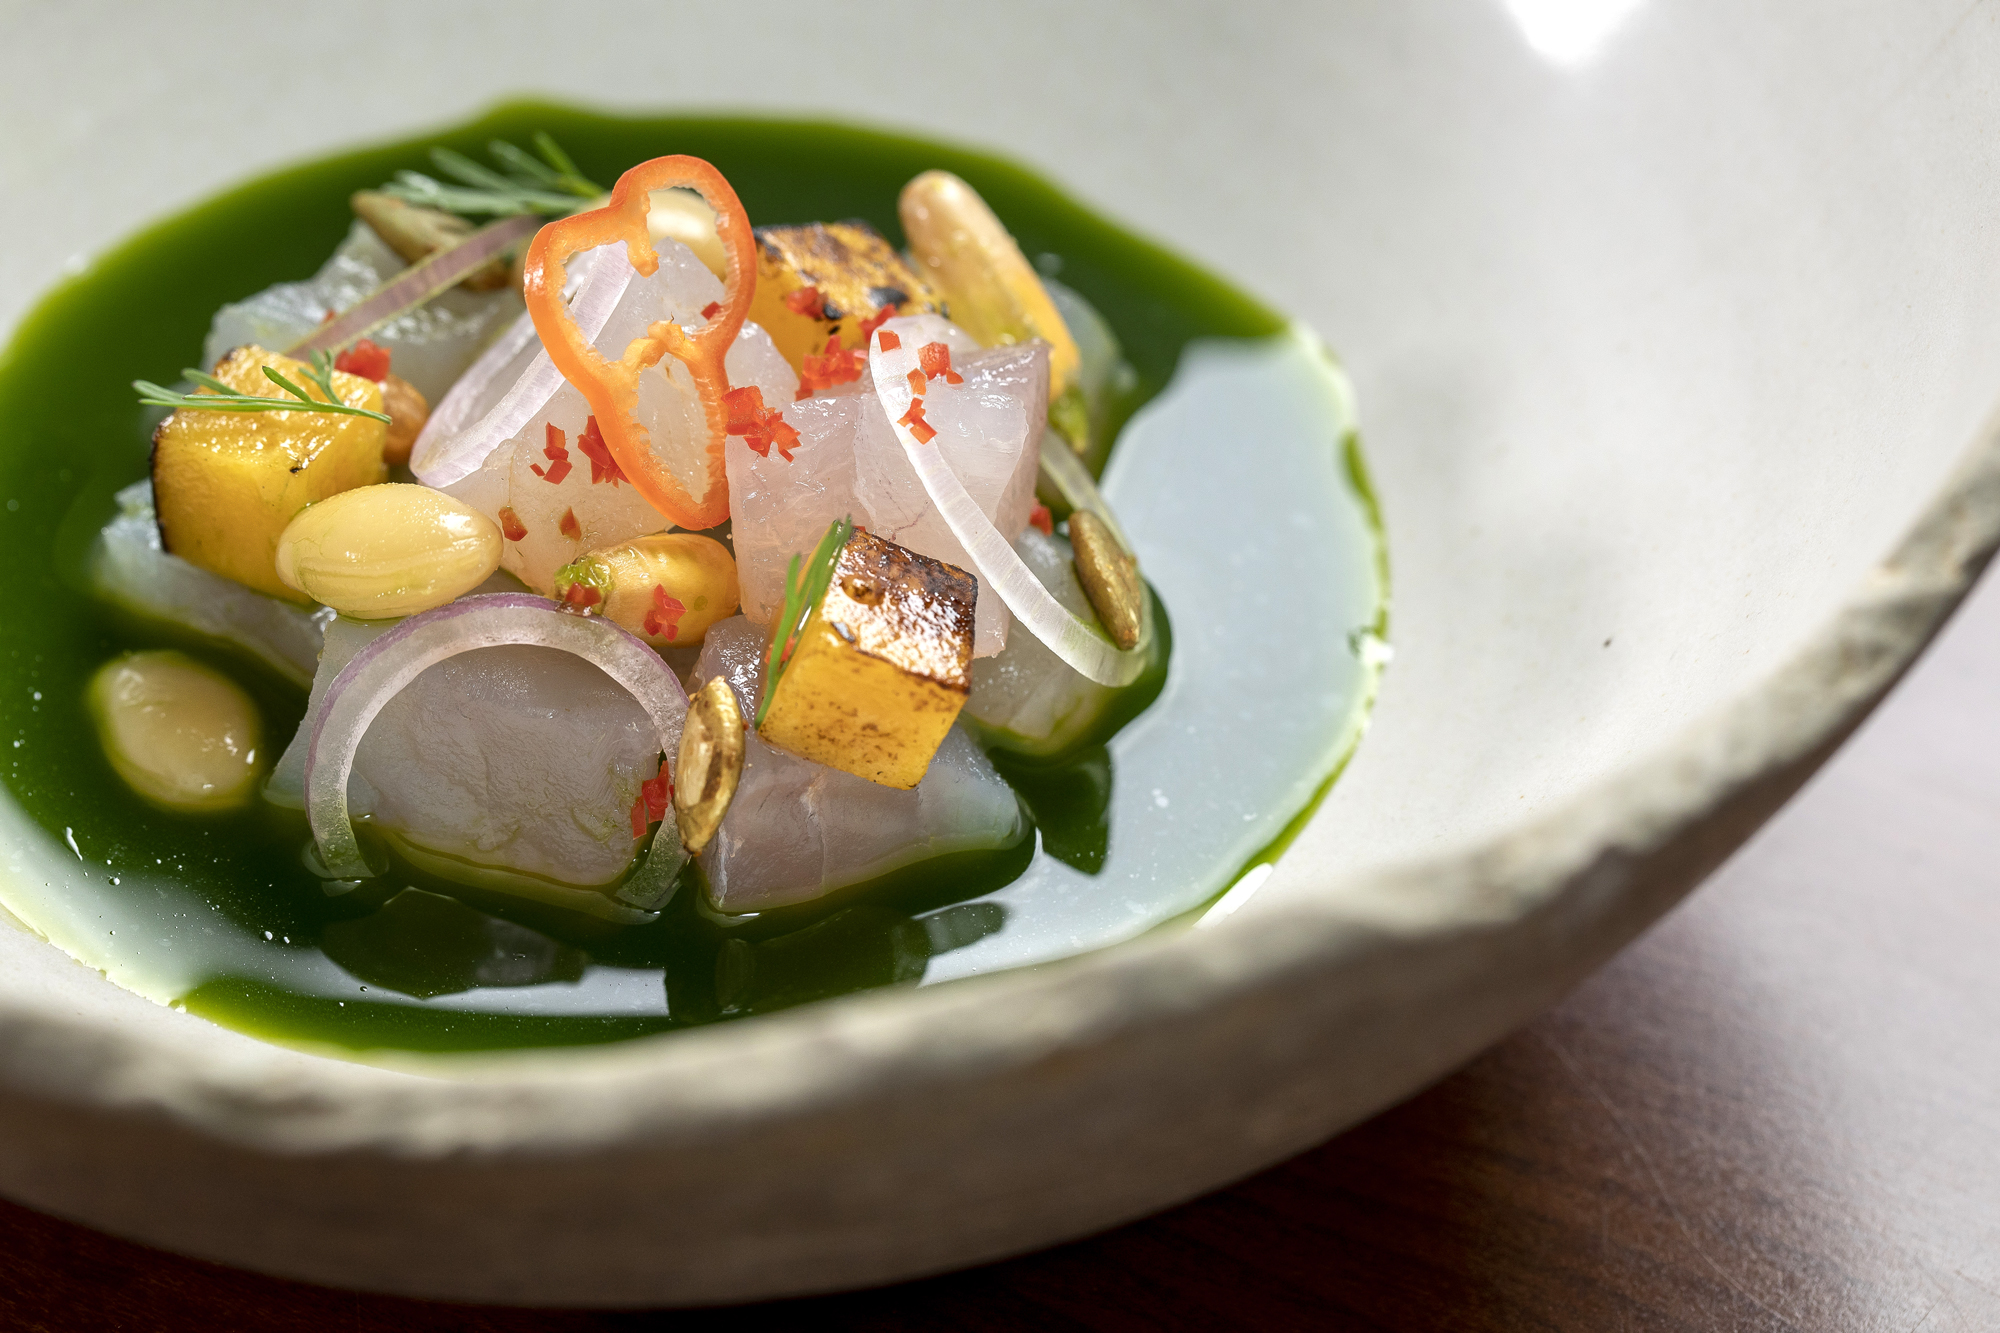 Plate of ceviche – raw fish dish with coriander and chilli